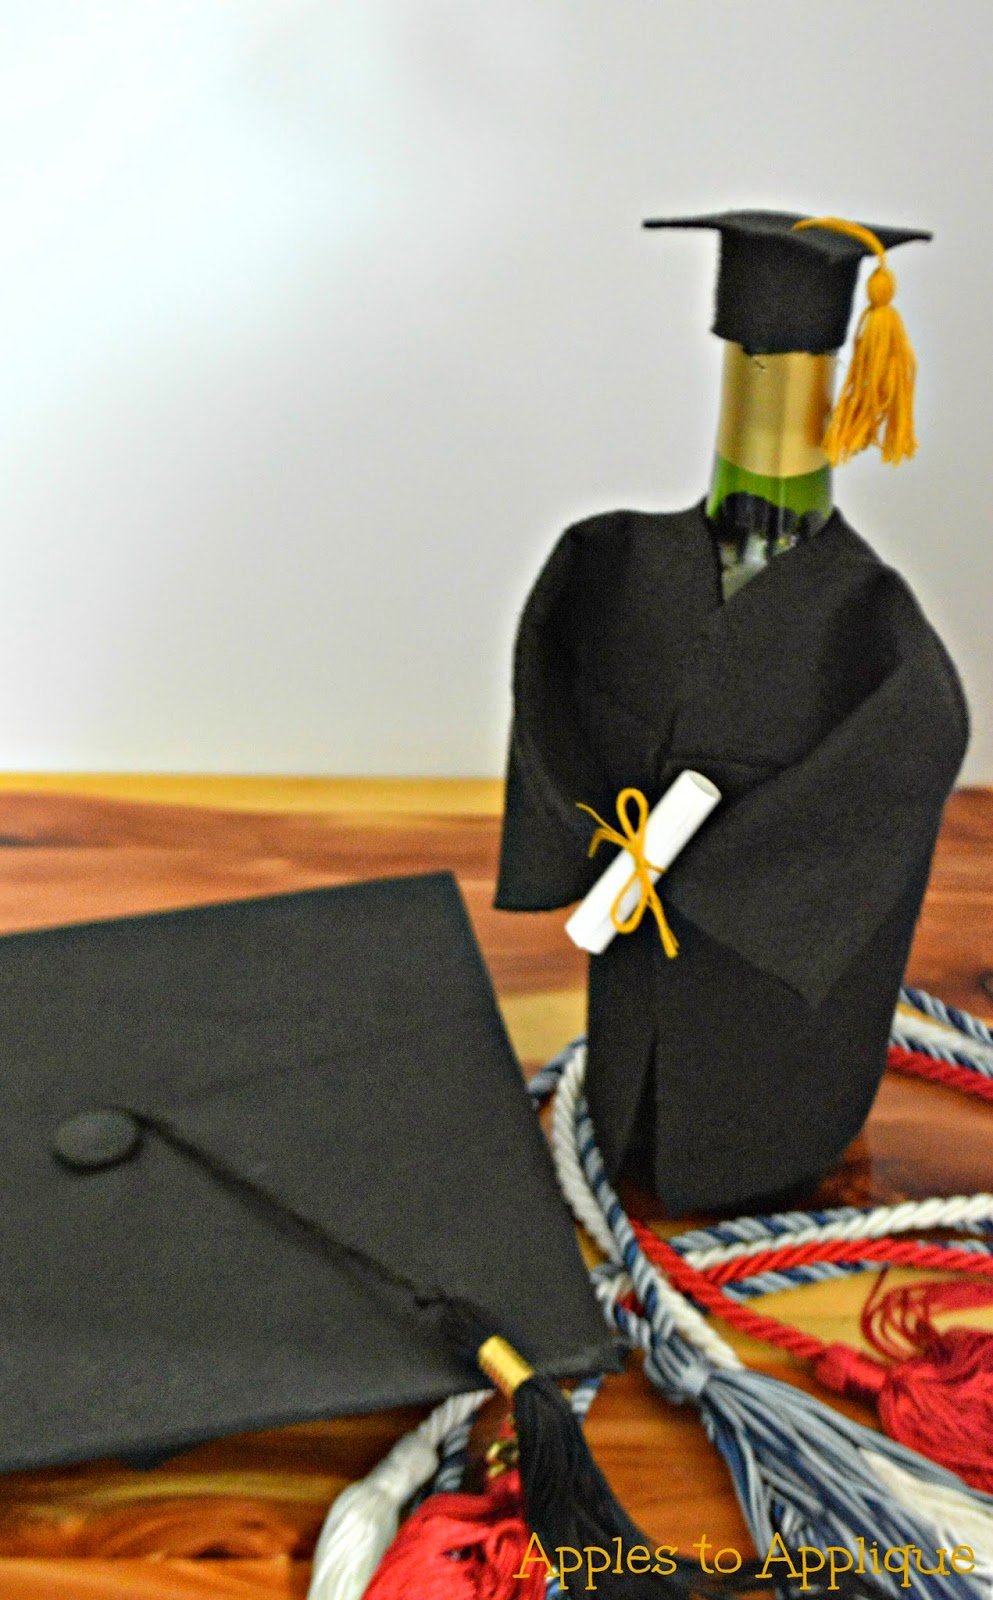 Cap and Gown Bottle Cover Tutorial | Apples to Applique #graduation #wine #gifts